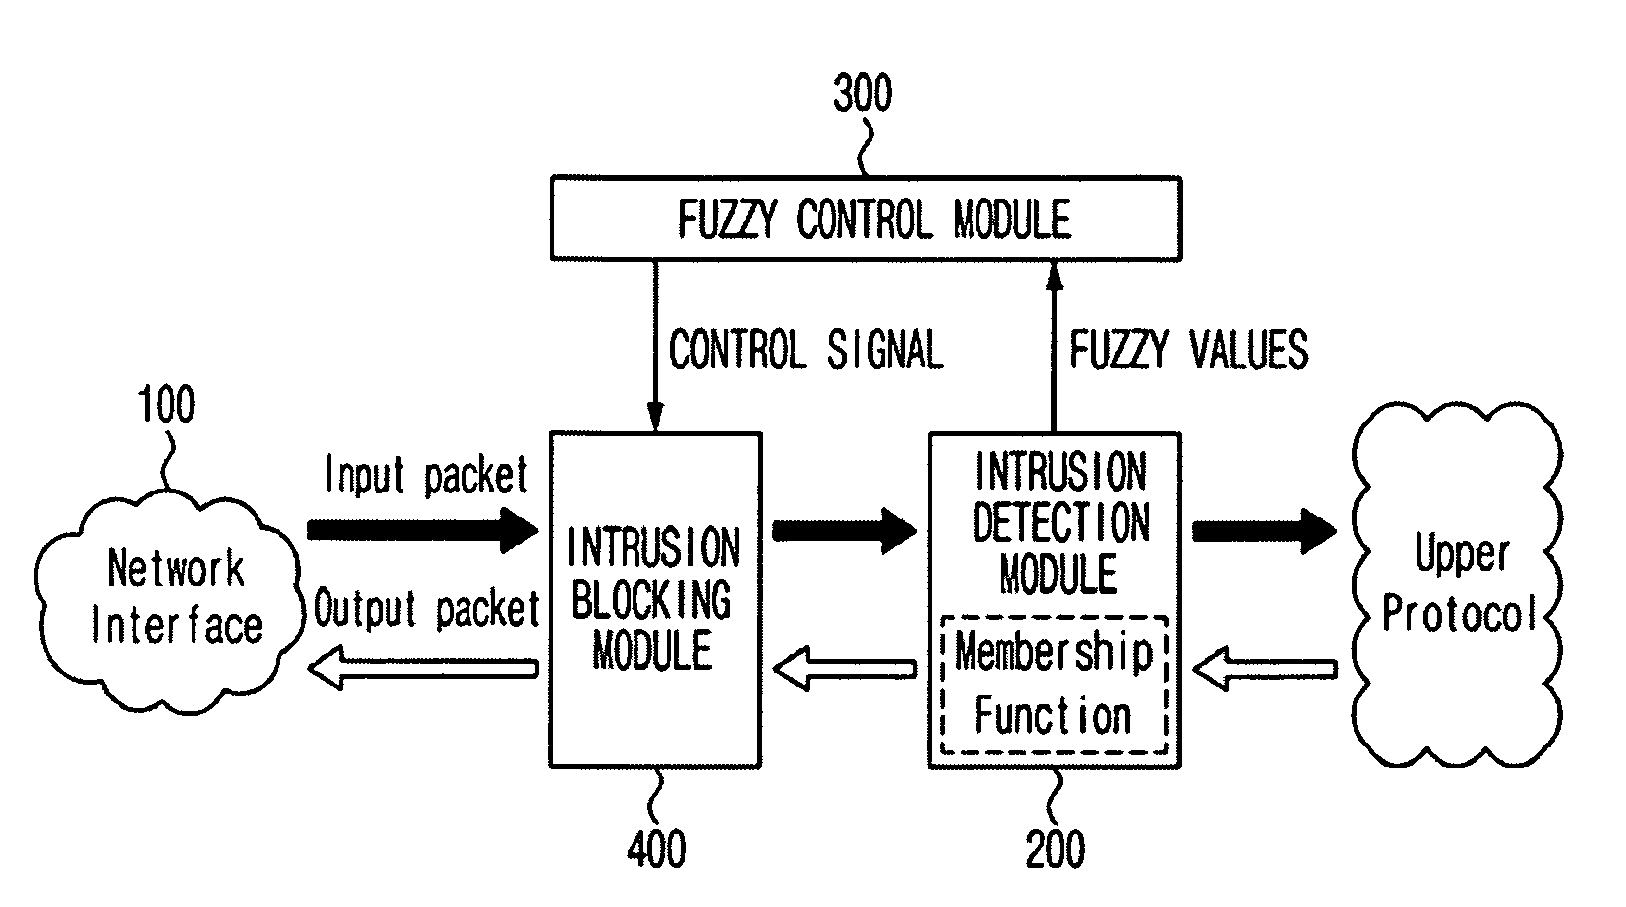 System and method for controlling abnormal traffic based on fuzzy logic